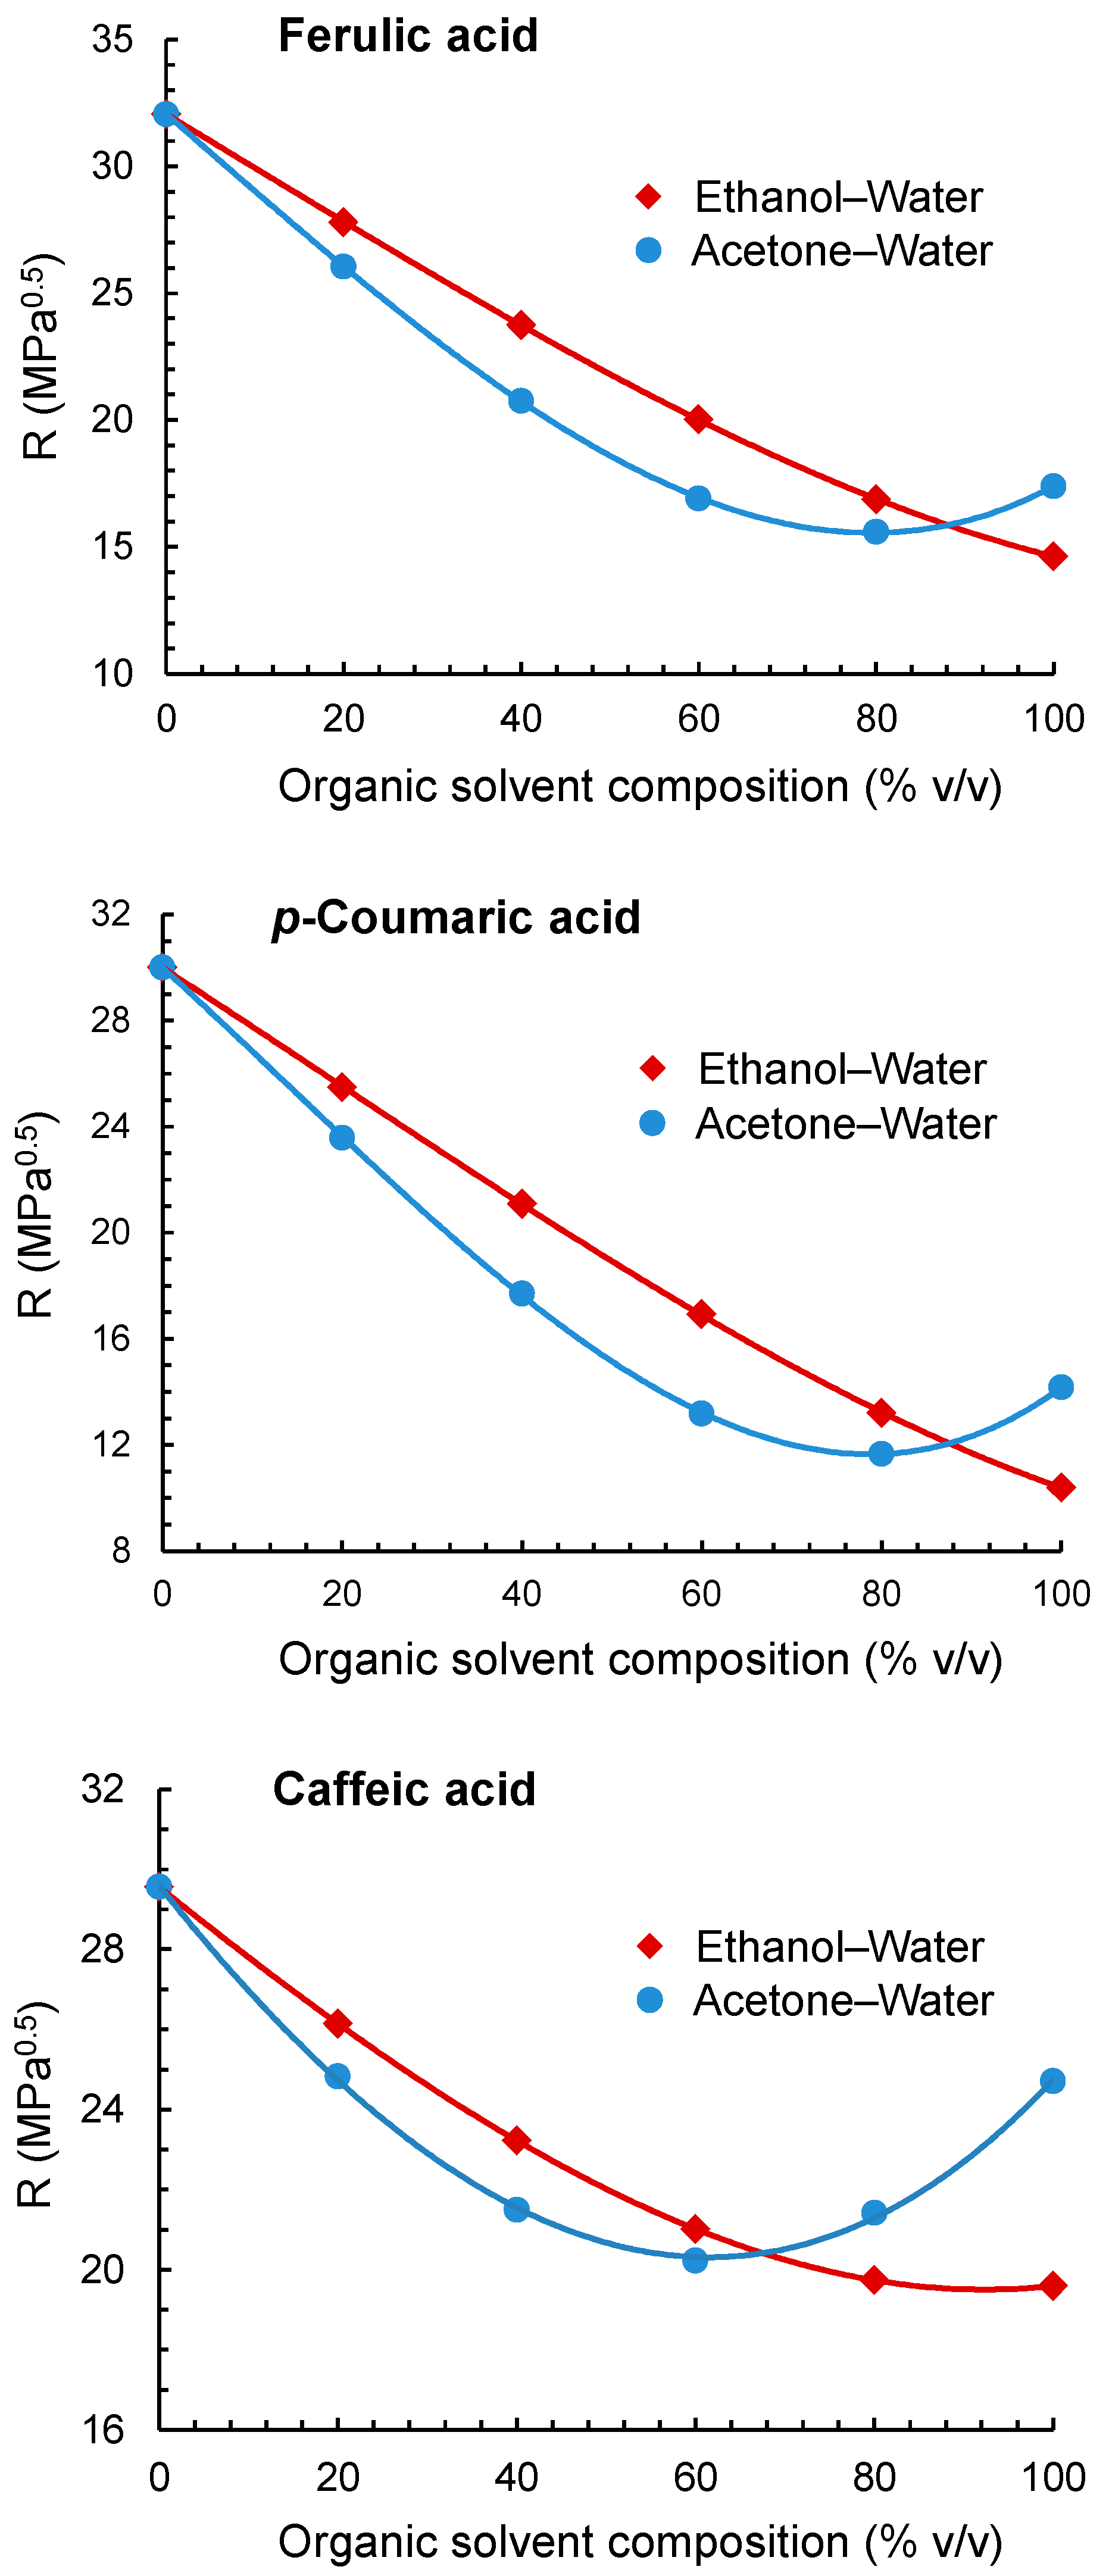 editing grain absorption in beersmith 3